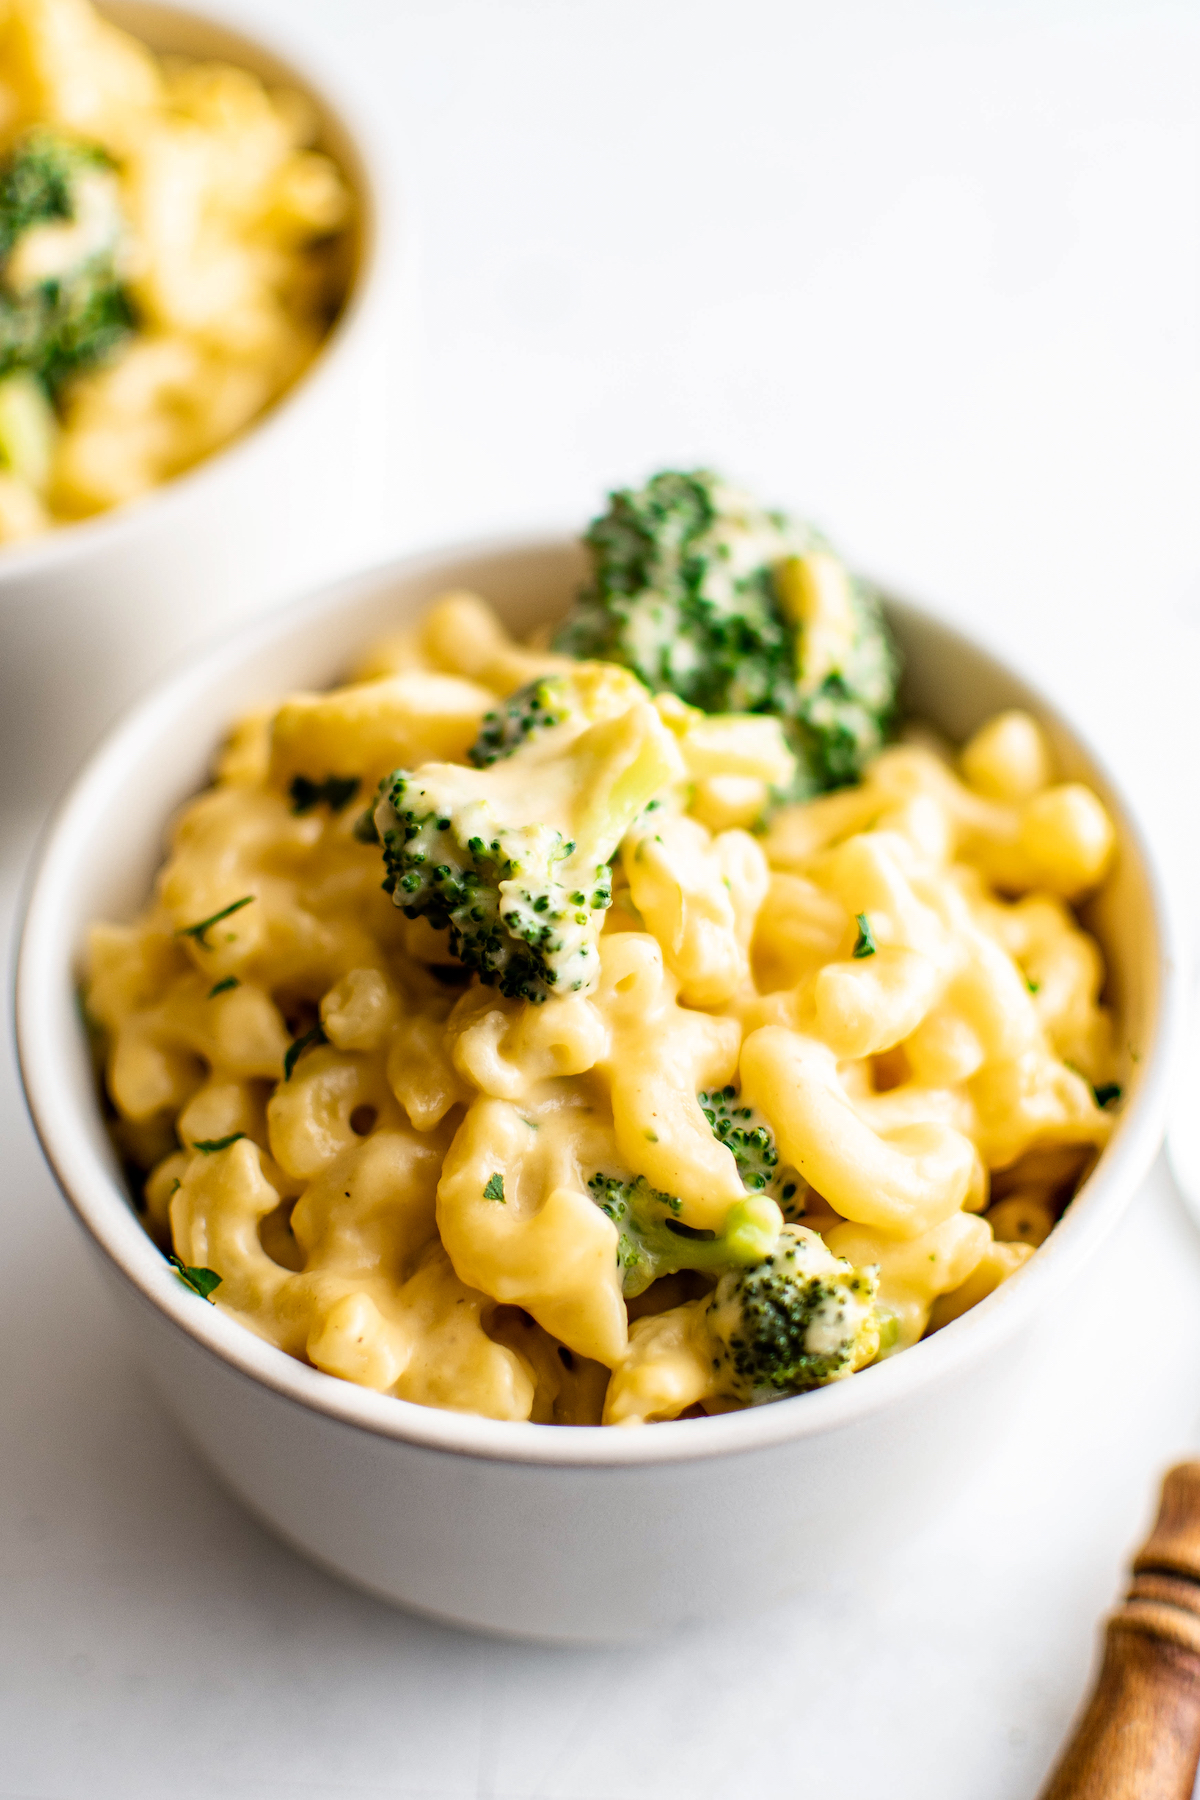 Macaroni and cheese with broccoli in small, white bowls.